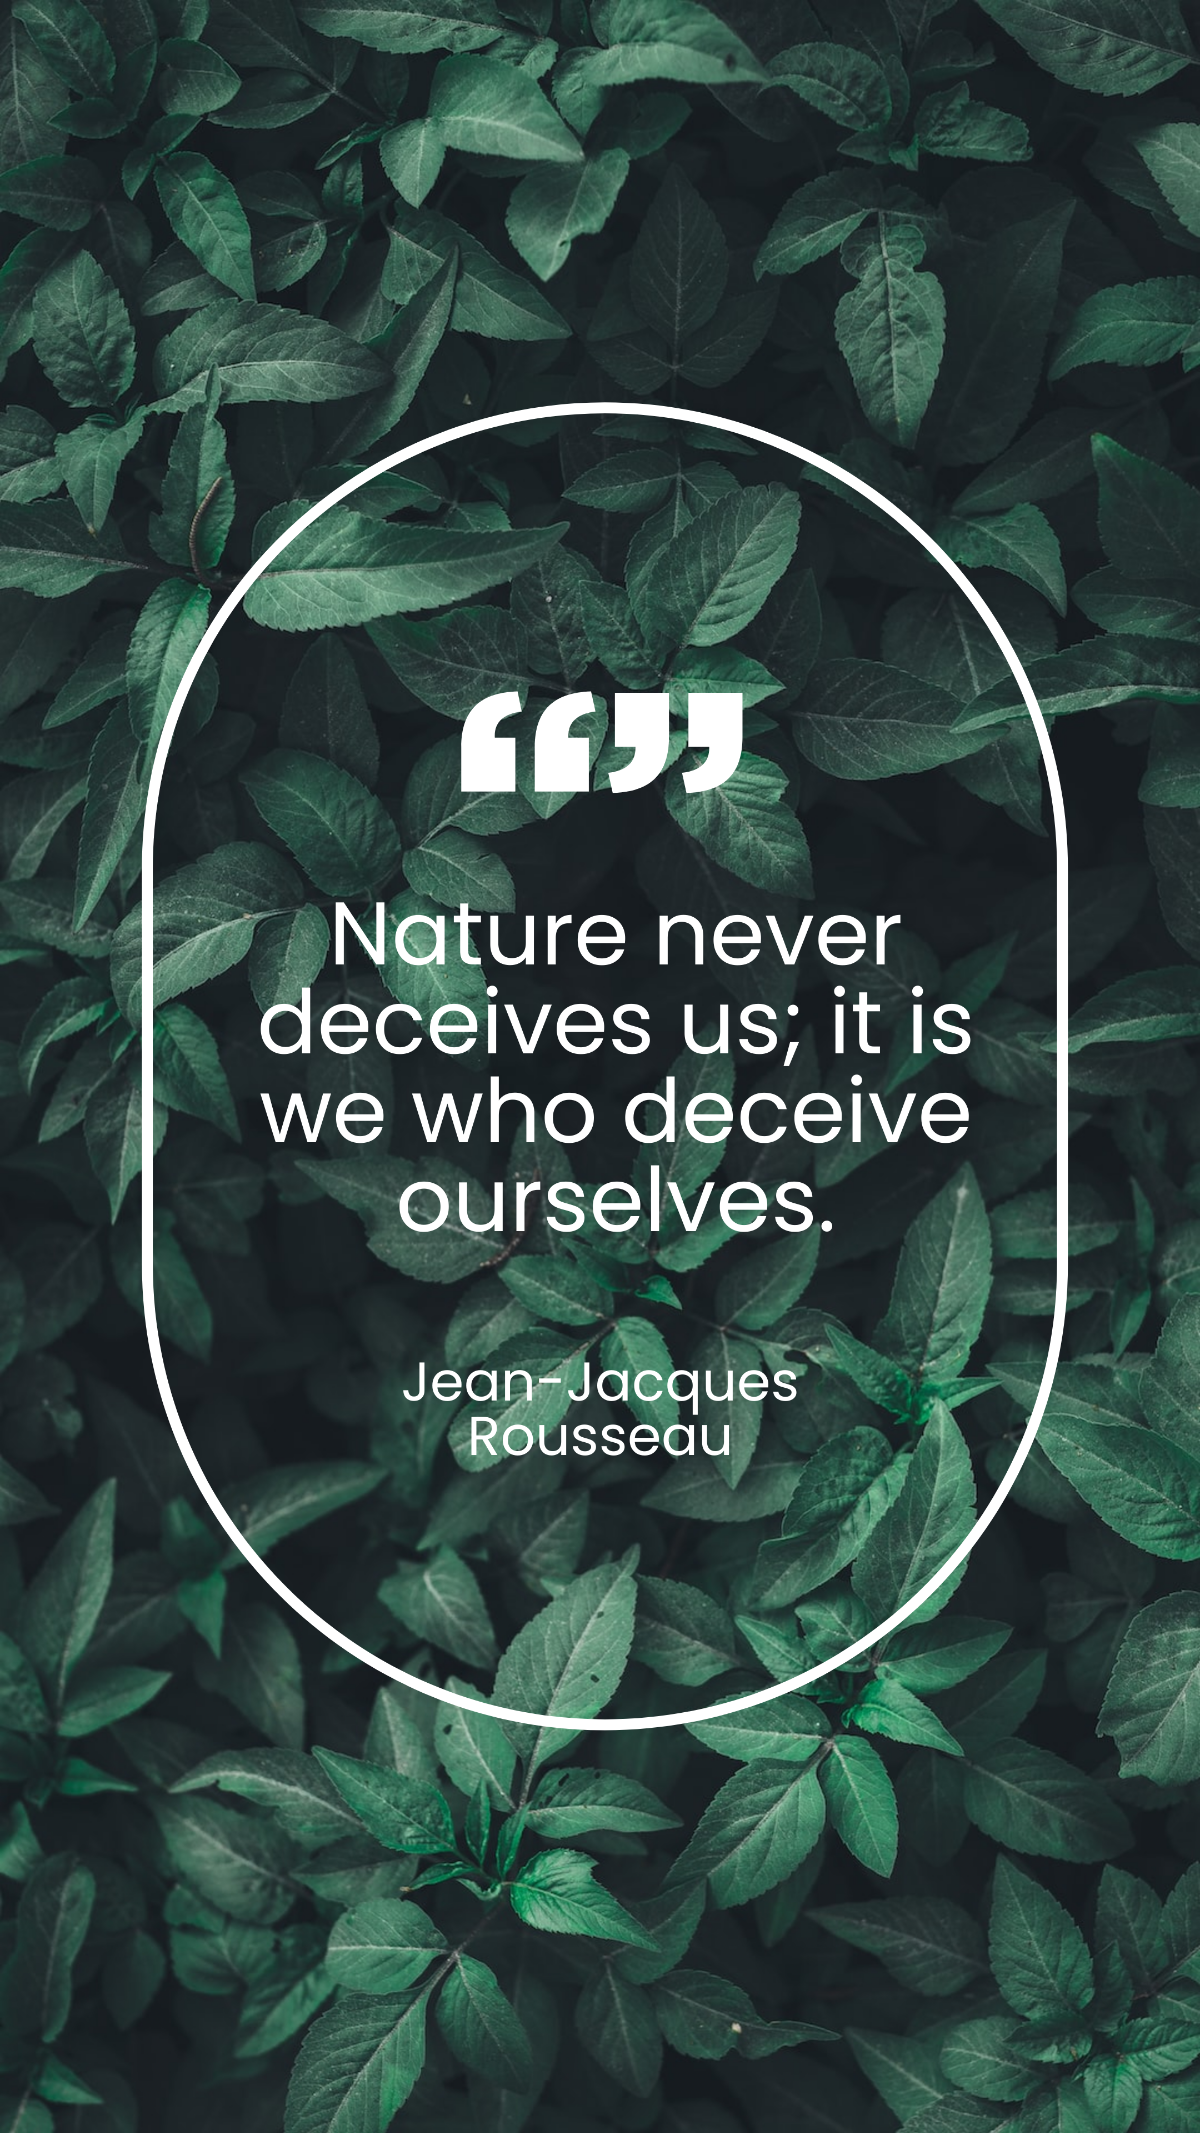 Free Jean-Jacques Rousseau - Nature never deceives us; it is we who deceive ourselves. Template